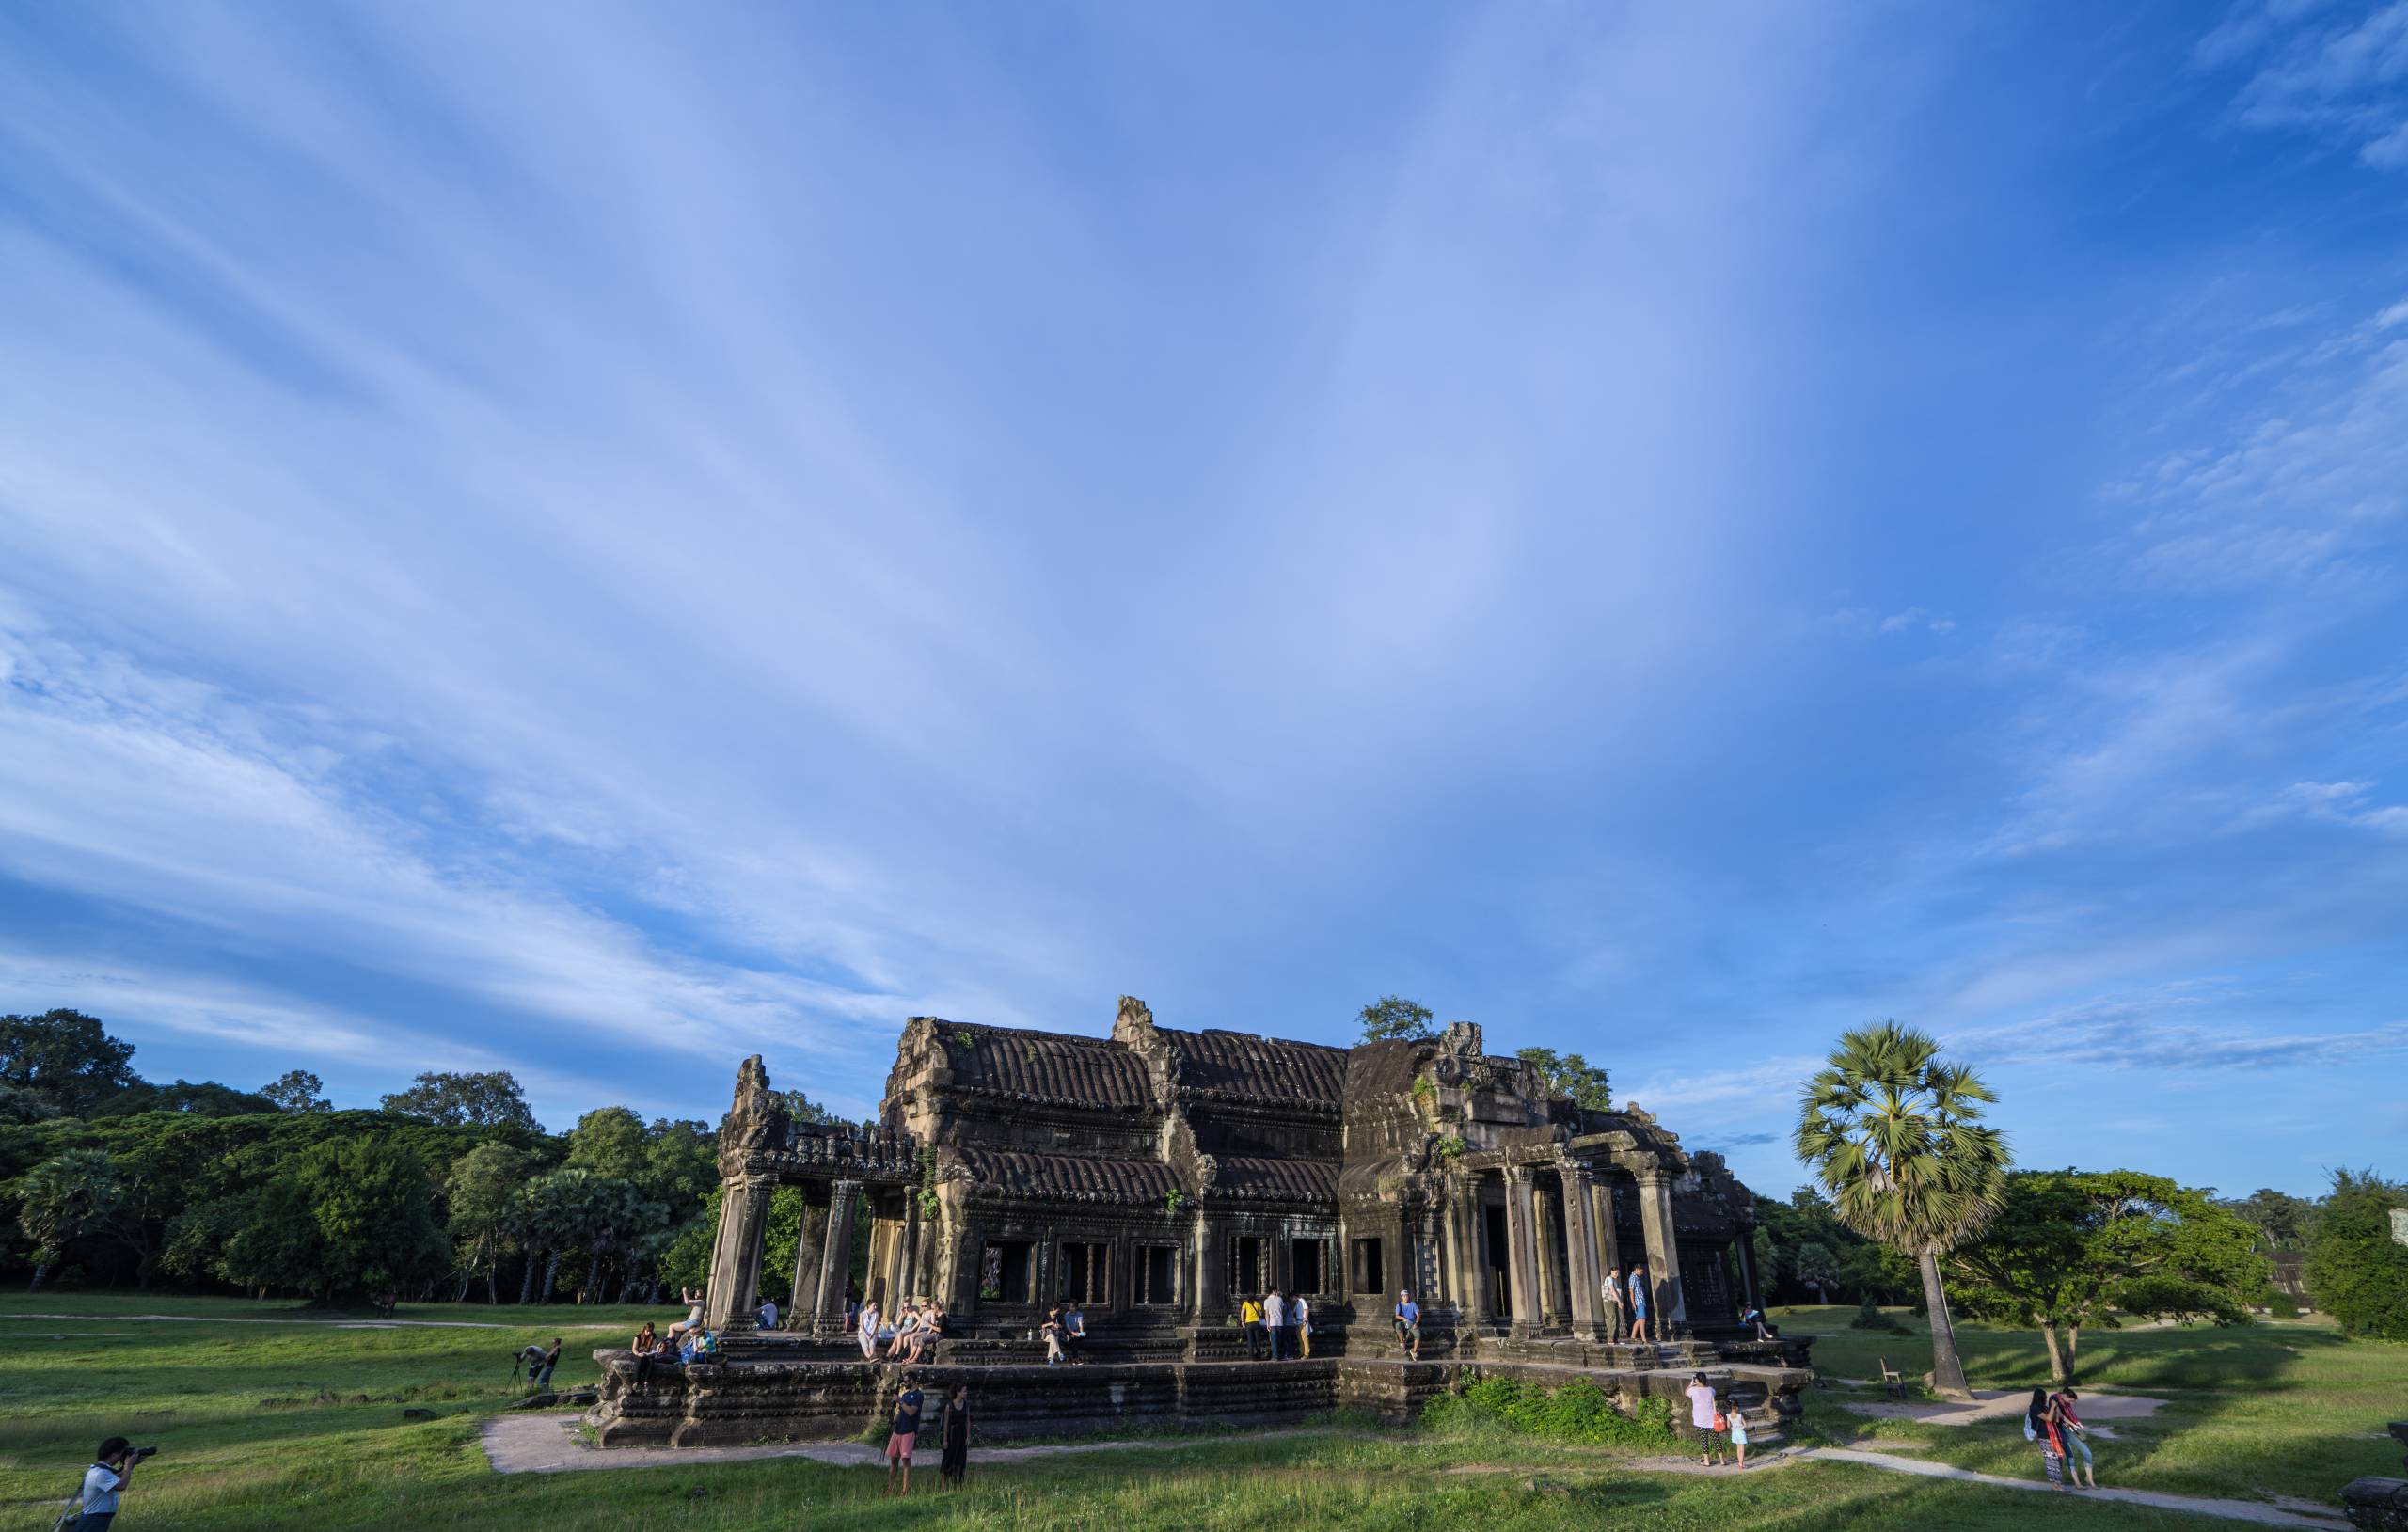 Aerial view of Angkor Wat temple, a UNESCO World Heritage site in Cambodia